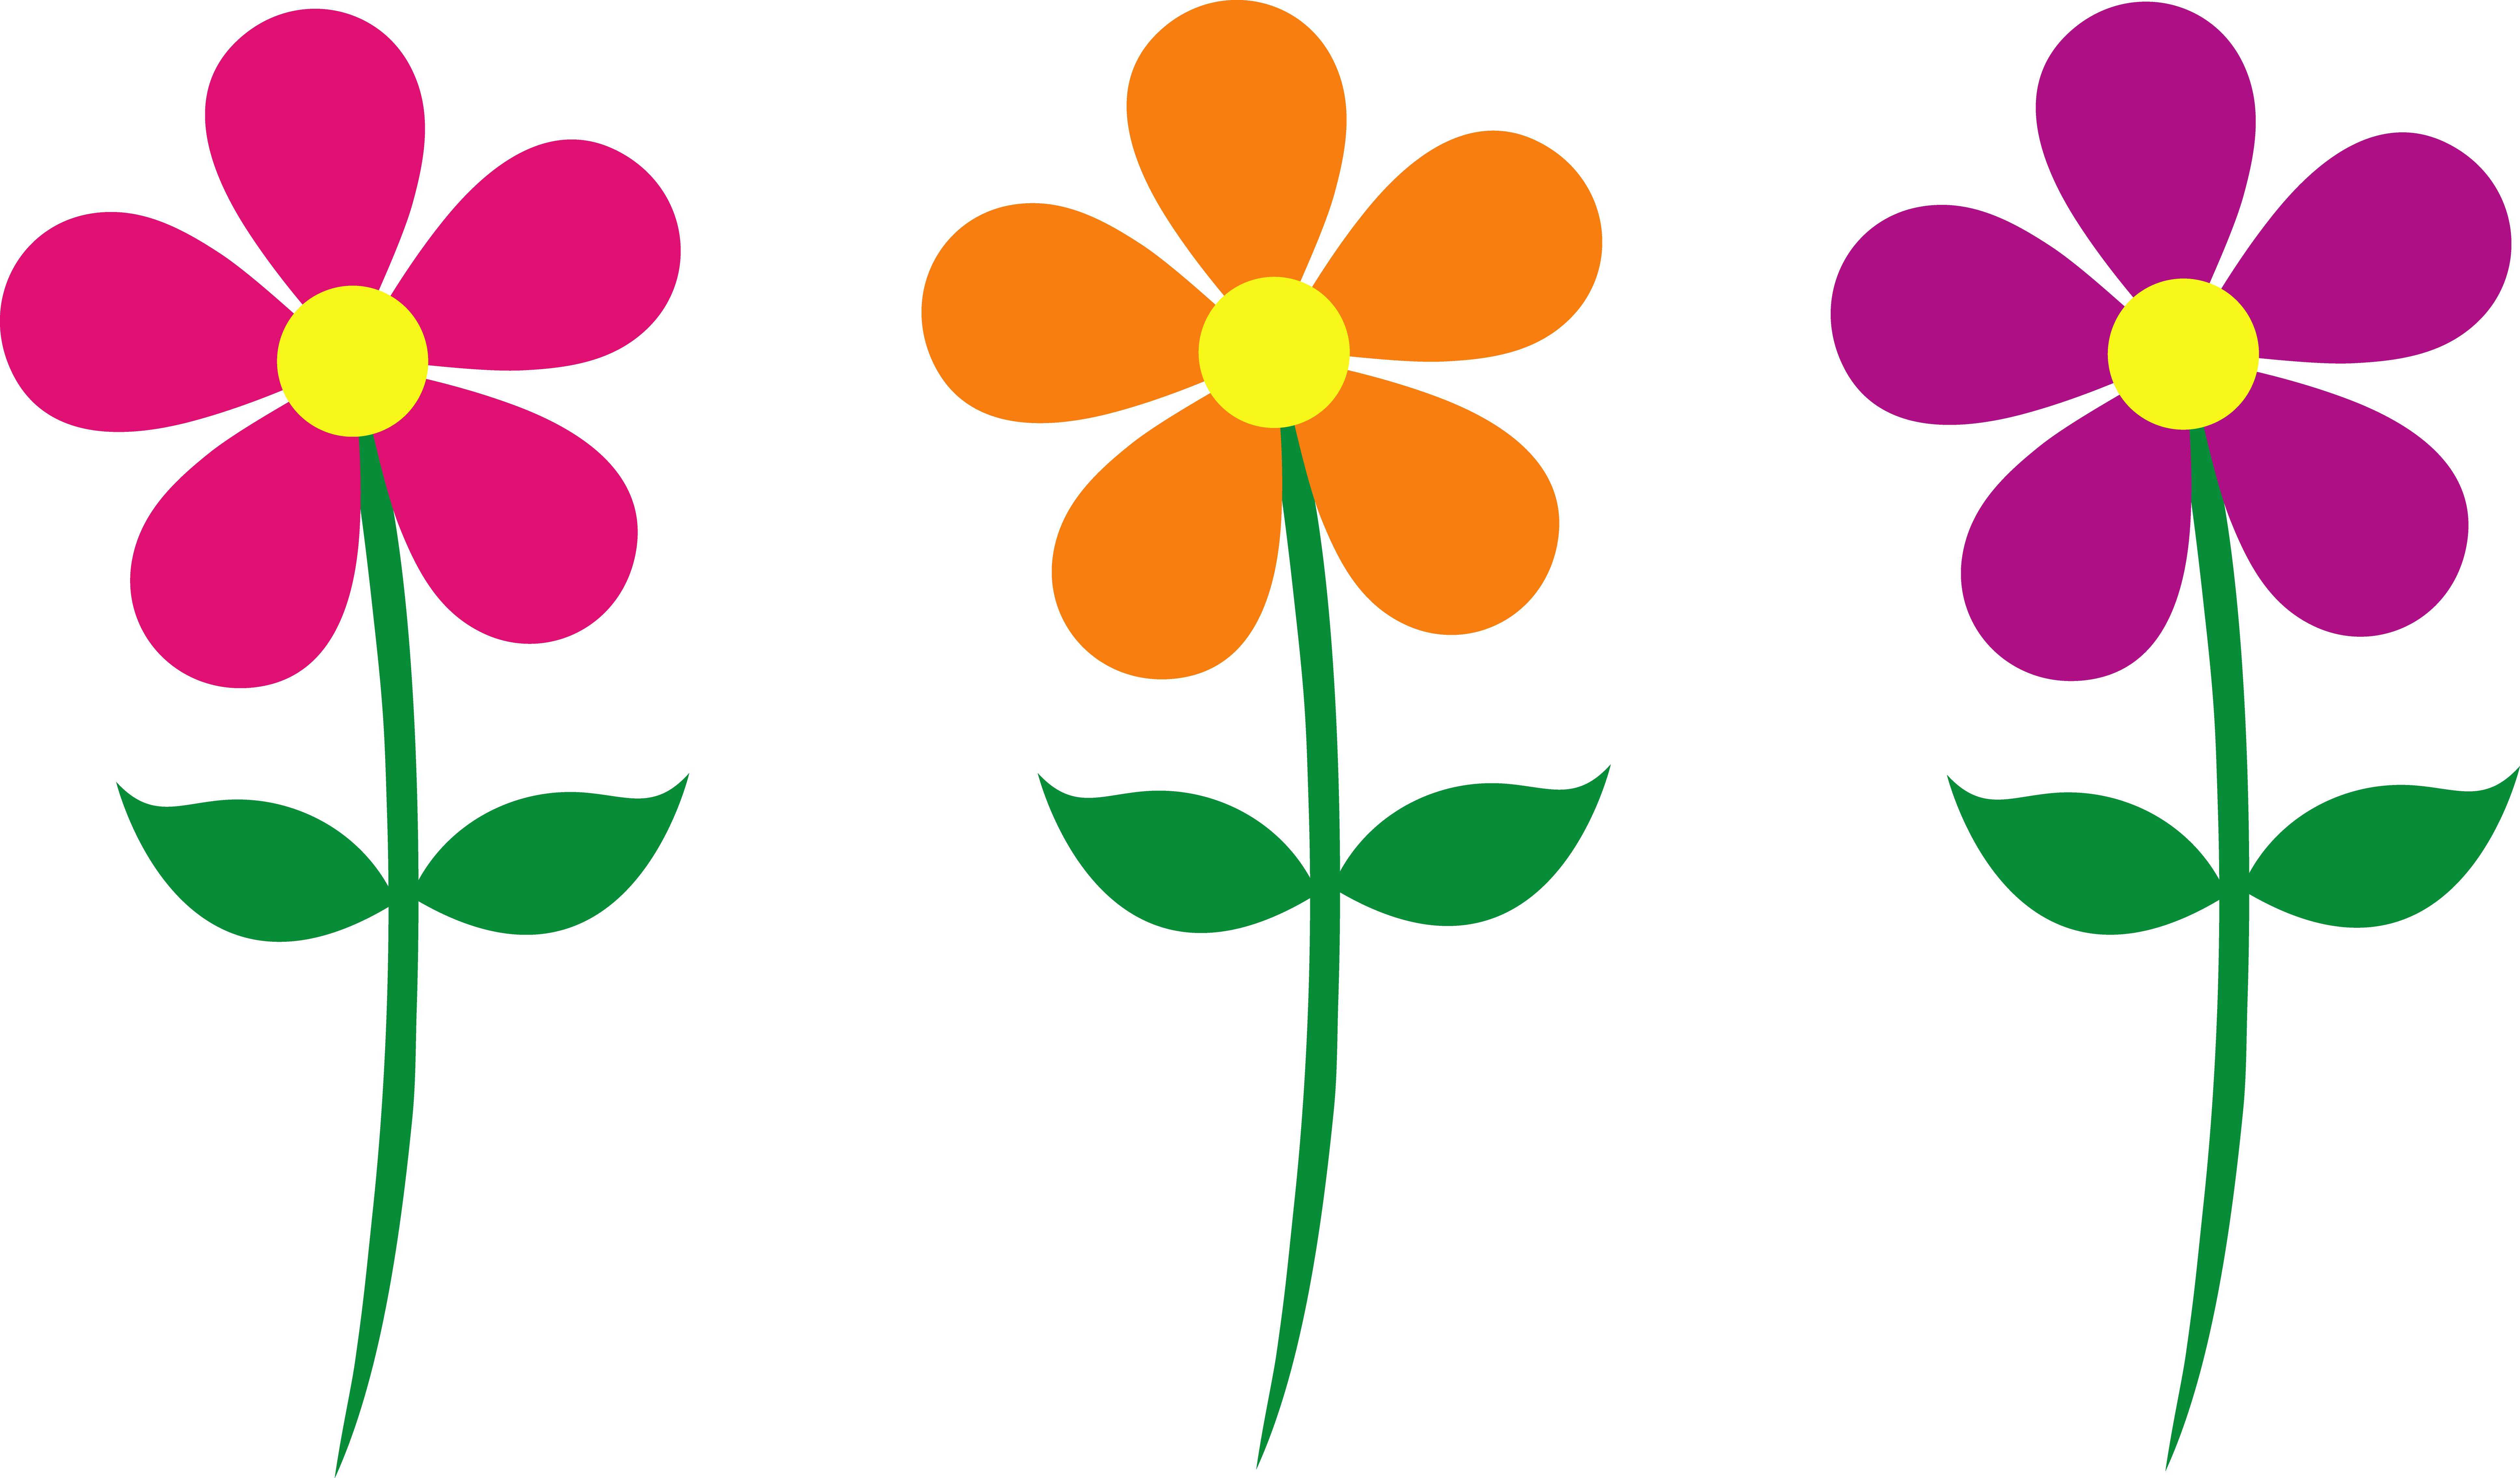 Free Flower Cartoon Images, Download Free Clip Art, Free Clip Art on ...